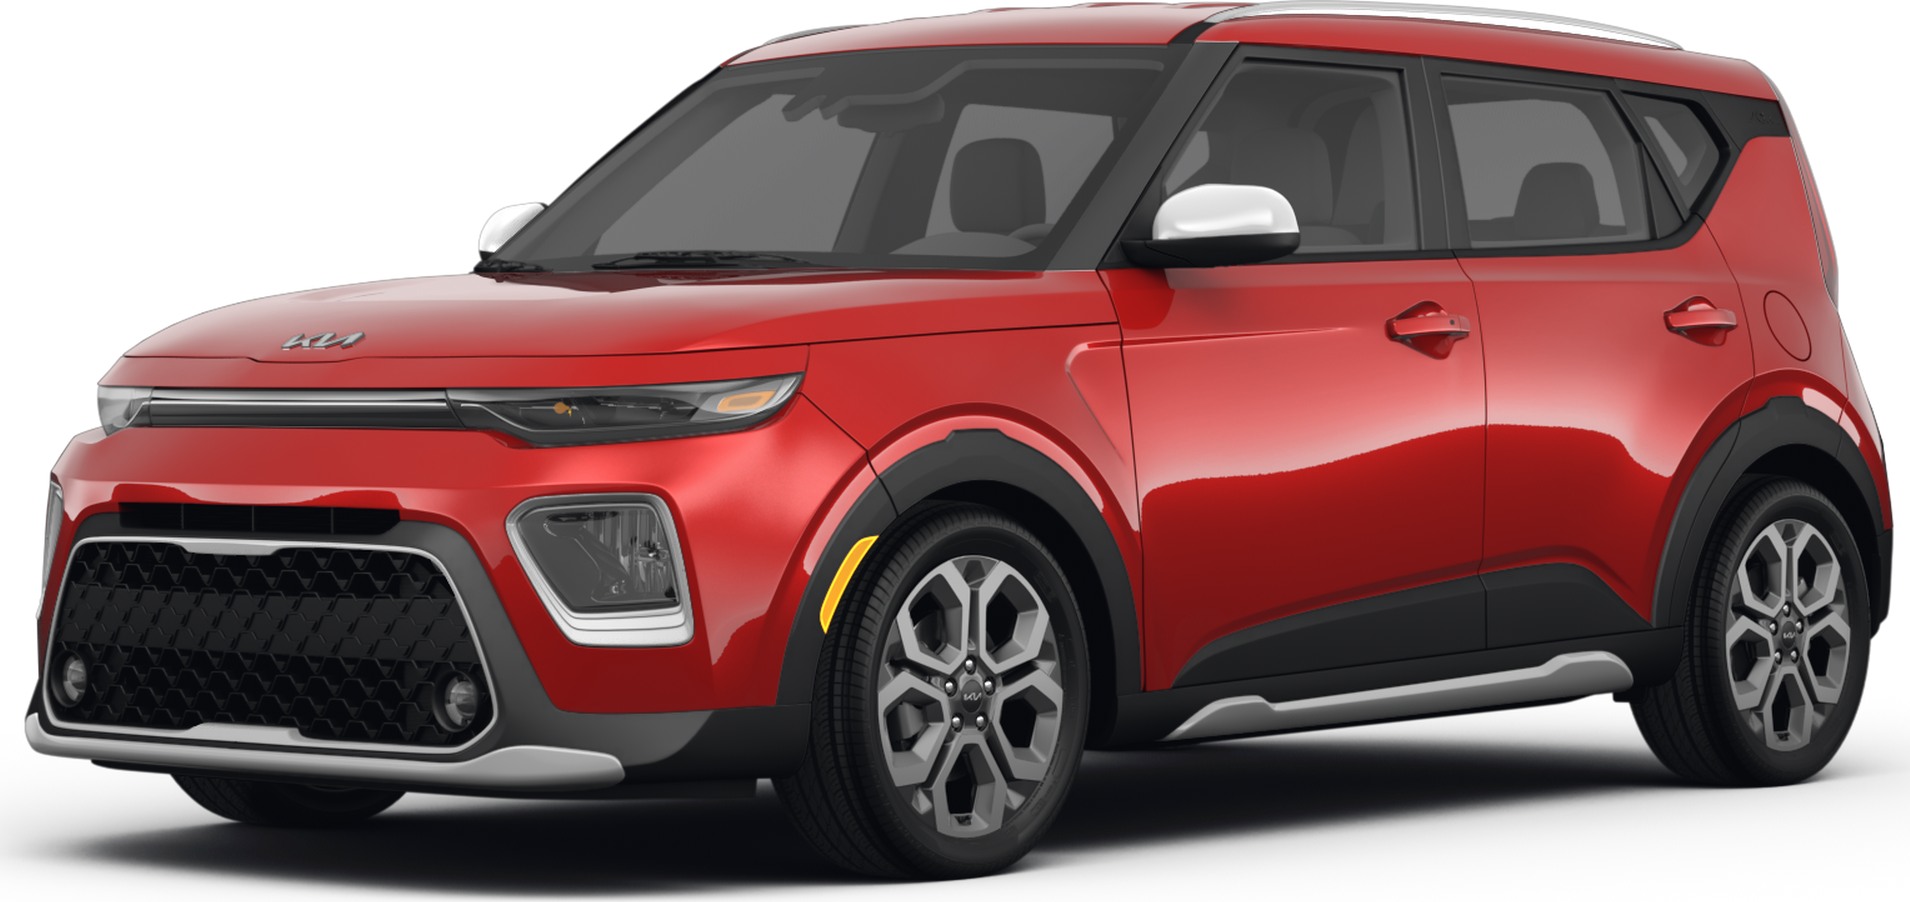 2022 Kia Soul Price, Reviews, Pictures & More | Kelley Blue Book